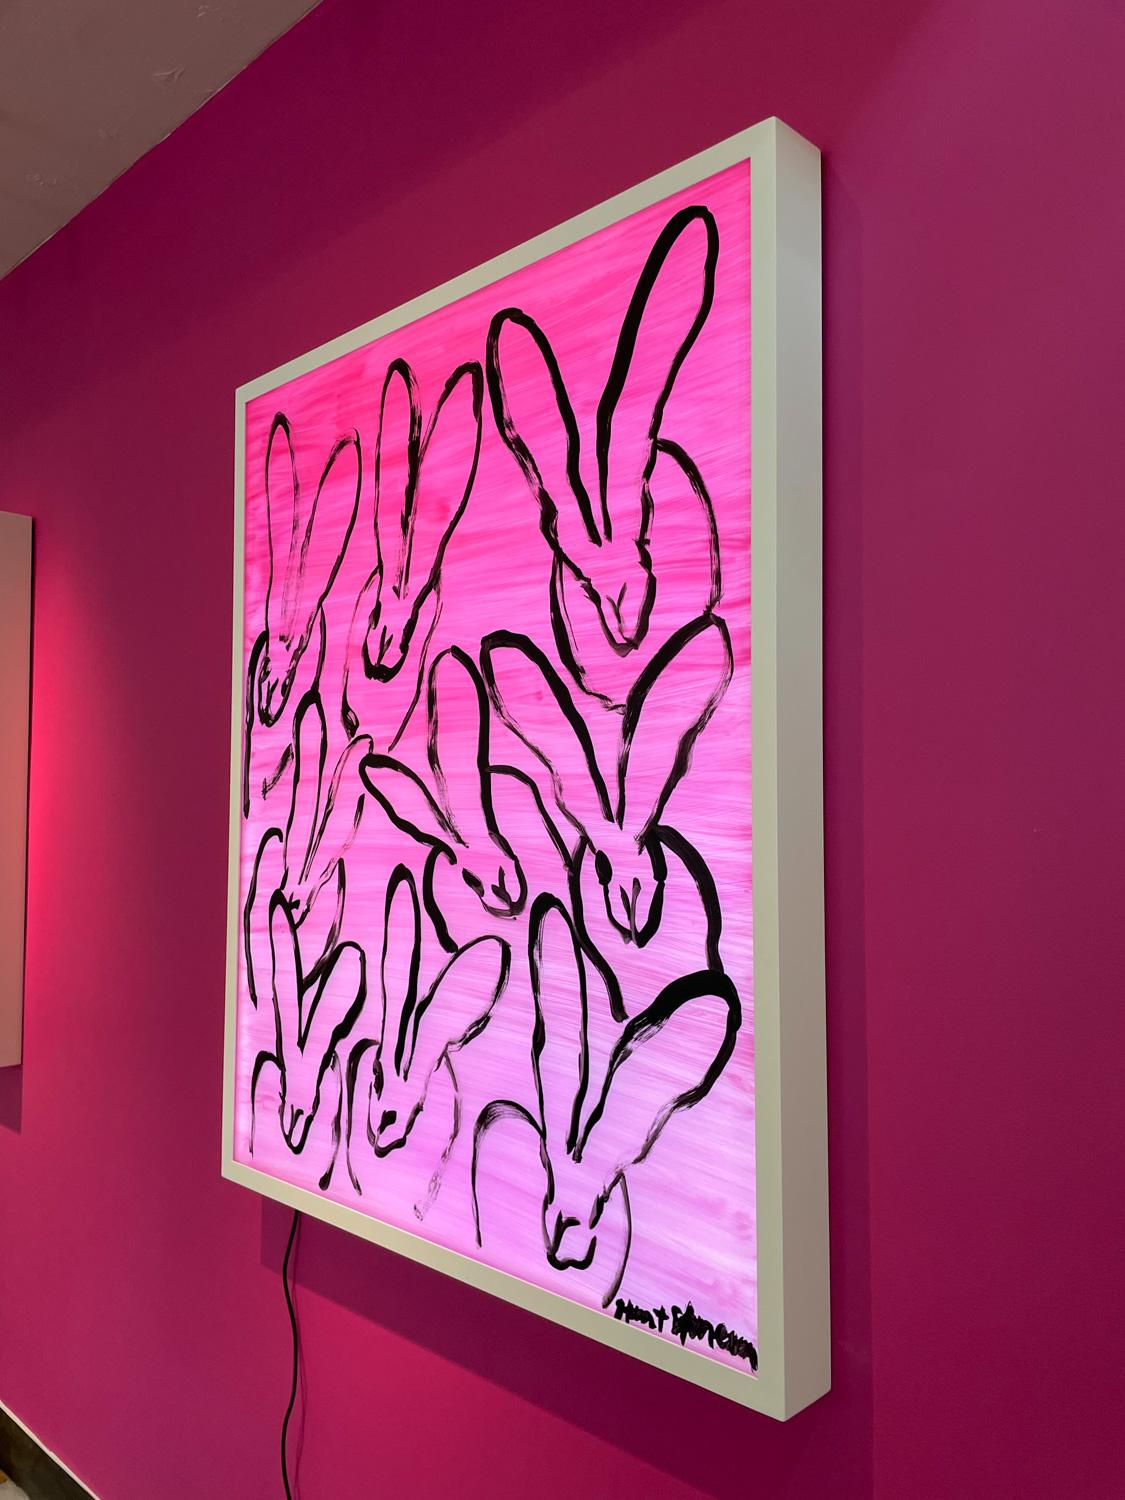 Hunt Slonem LED Lightbox with acrylic painted bunnies and powerful pink background. A nearby electrical outlet is required for installation.

Inspired by nature and his 60 pet birds, Hunt Slonem is renowned for his distinct neo- expressionist style.